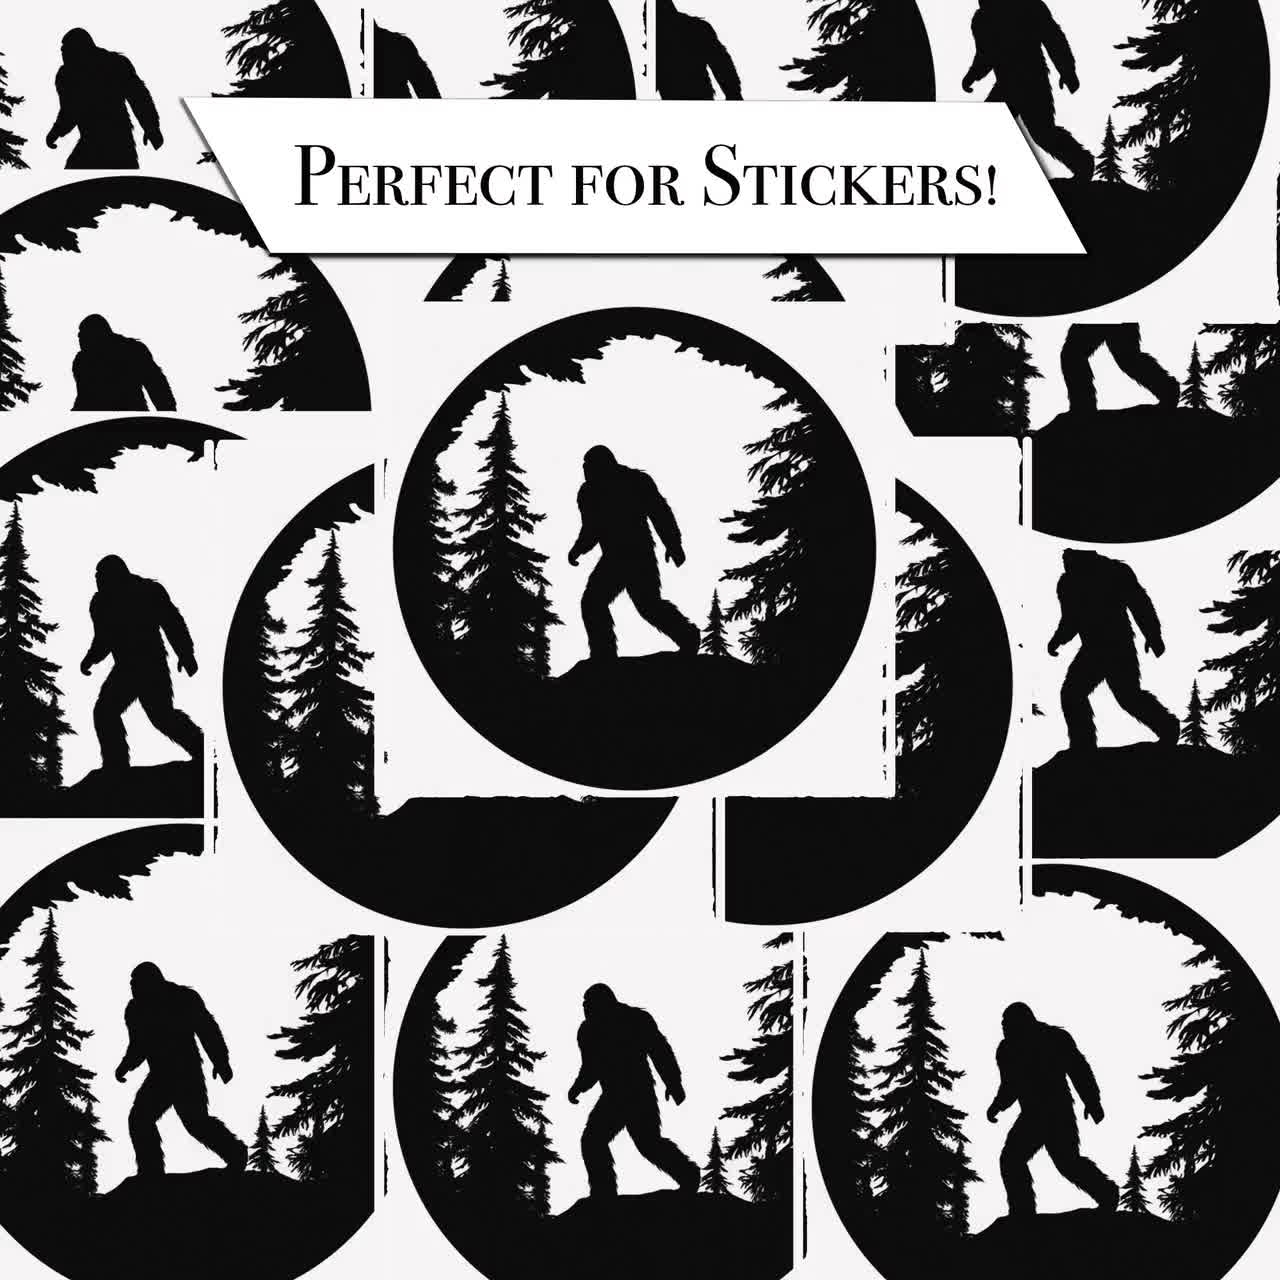 Bigfoot roams these woods graphic Royalty Free Vector Image